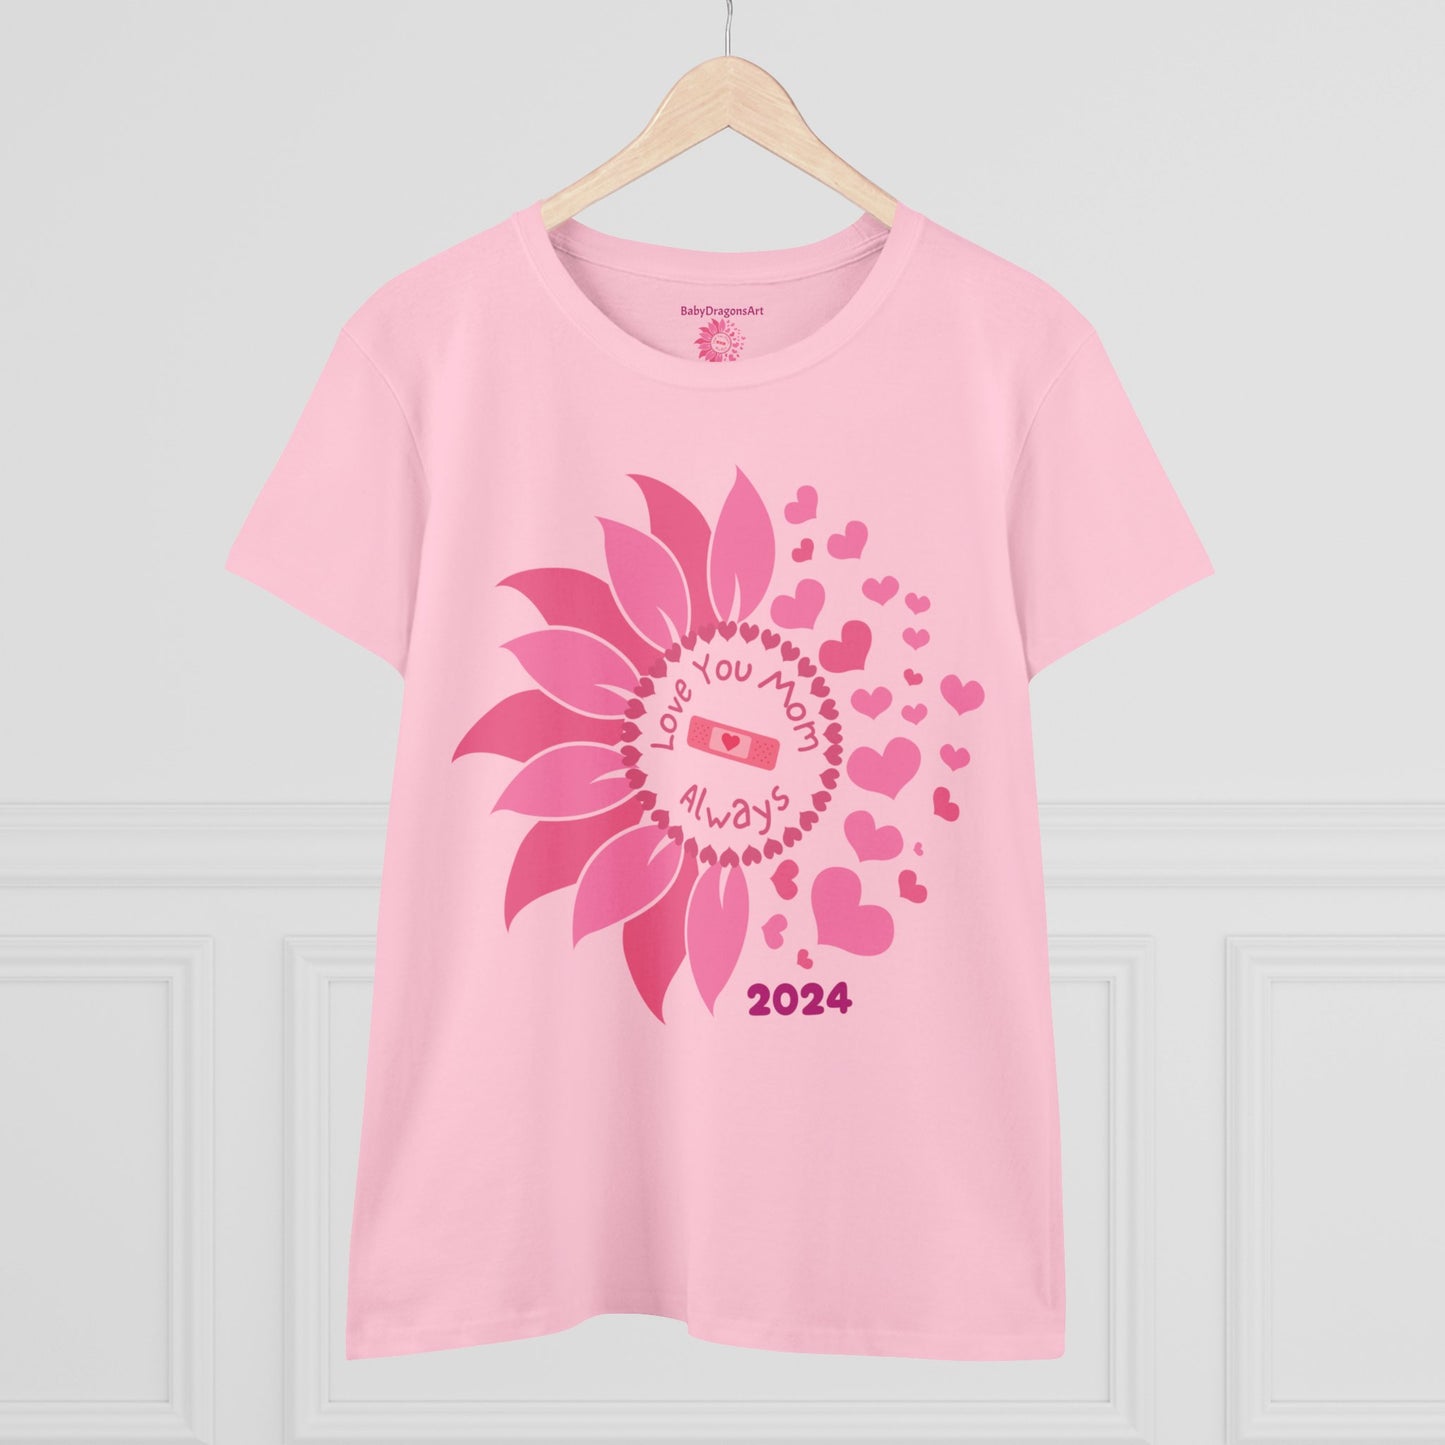 Love You Mom Always 2024 Women's Midweight Cotton Tee - Best Mom Gift